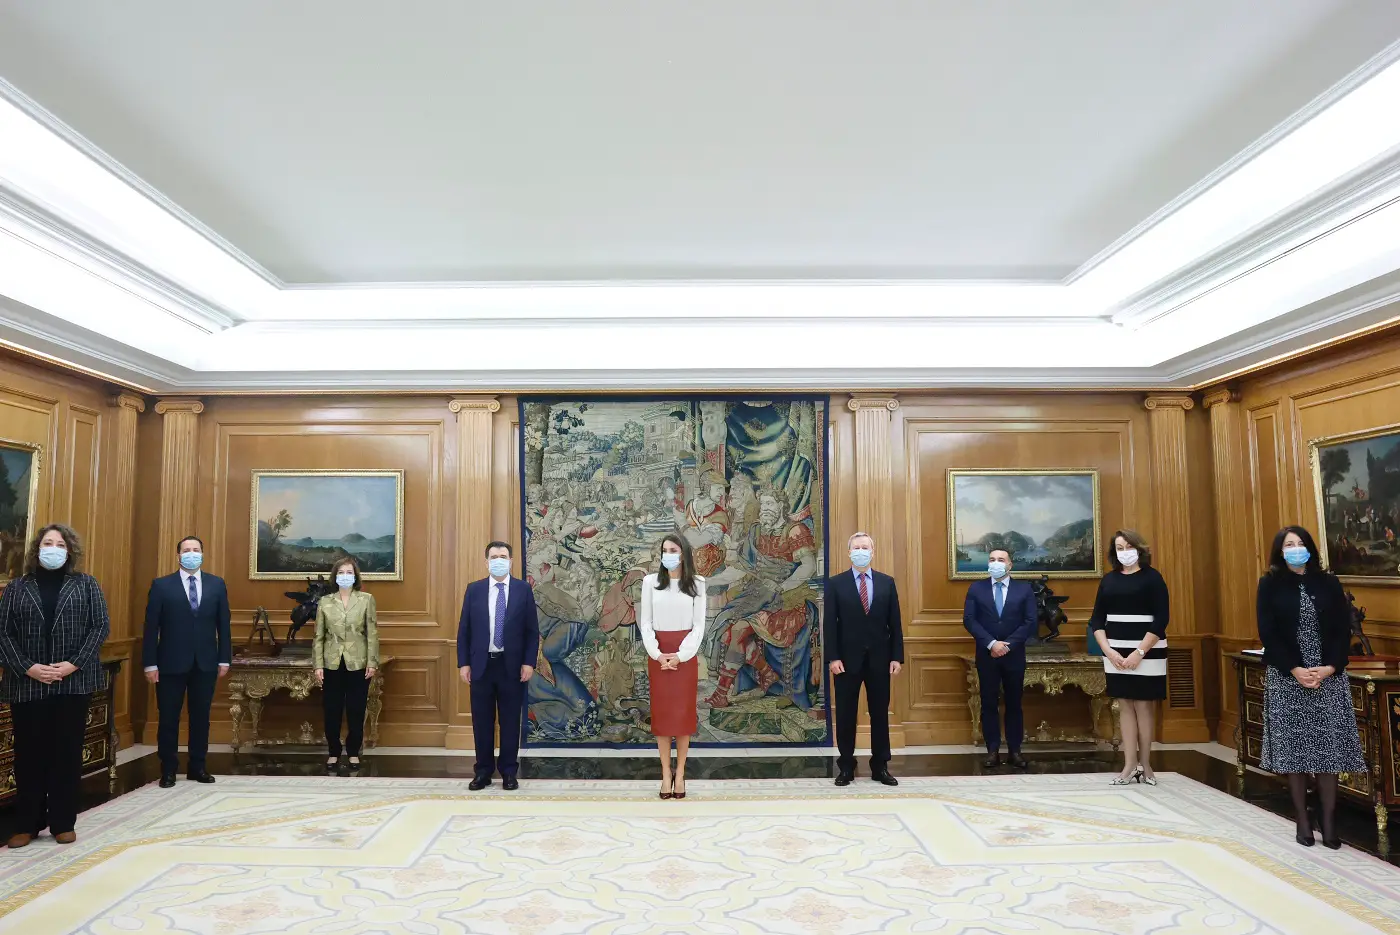 Queen Letizia of Spain met with the Spanish Association of Periodical Publications Publishers (AEEPP)